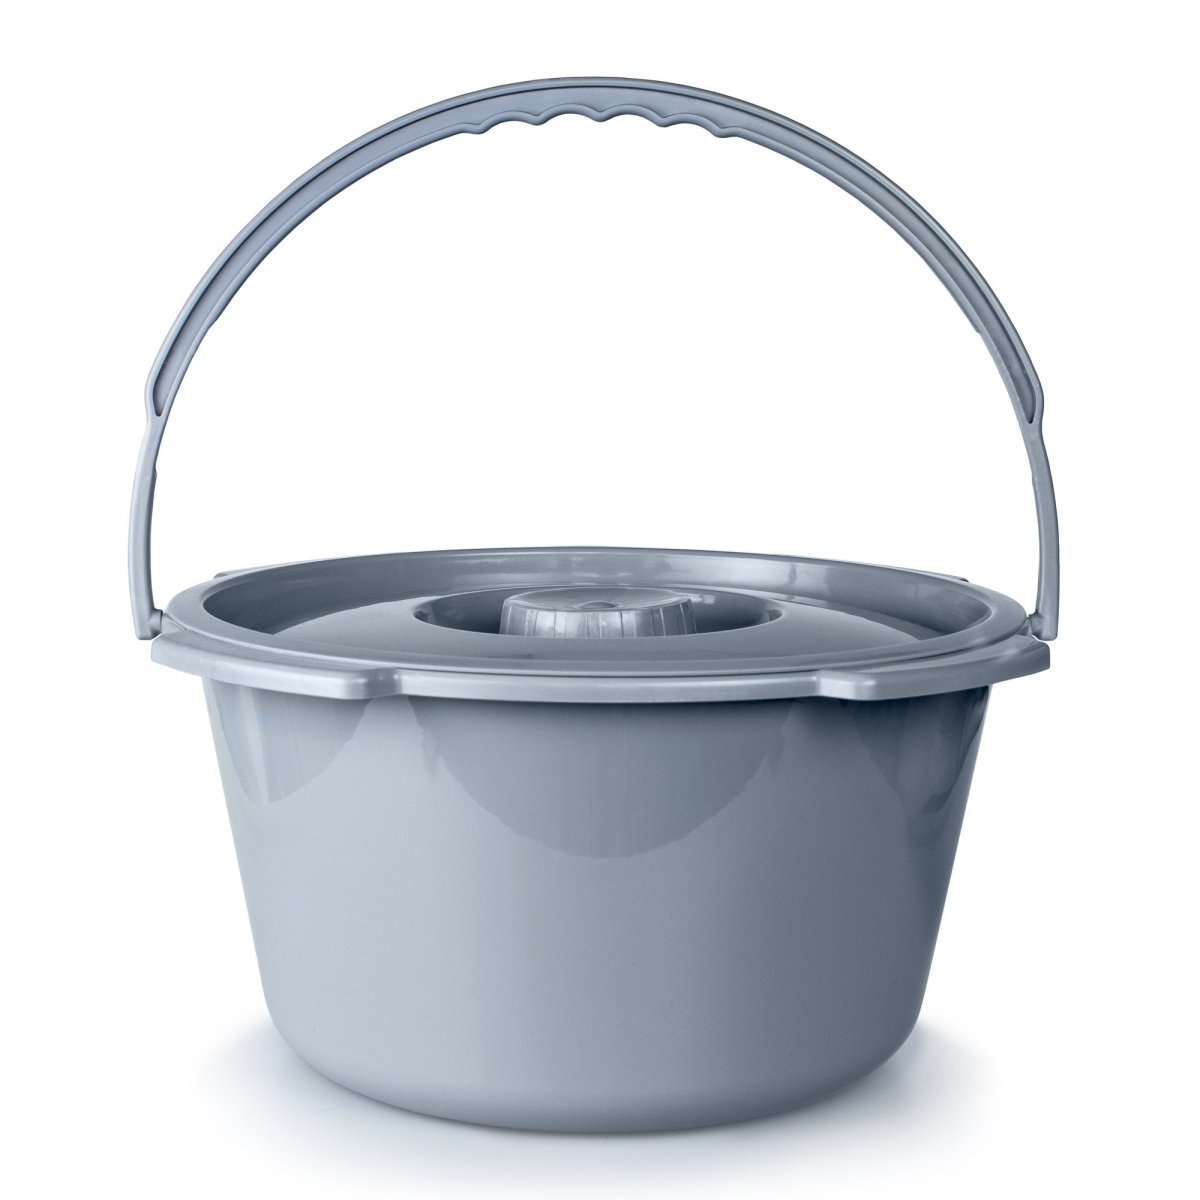 McKesson Commode Bucket With Metal Handle And Cover, 7-1/2 Quart, Gray - 1103373_CS - 2